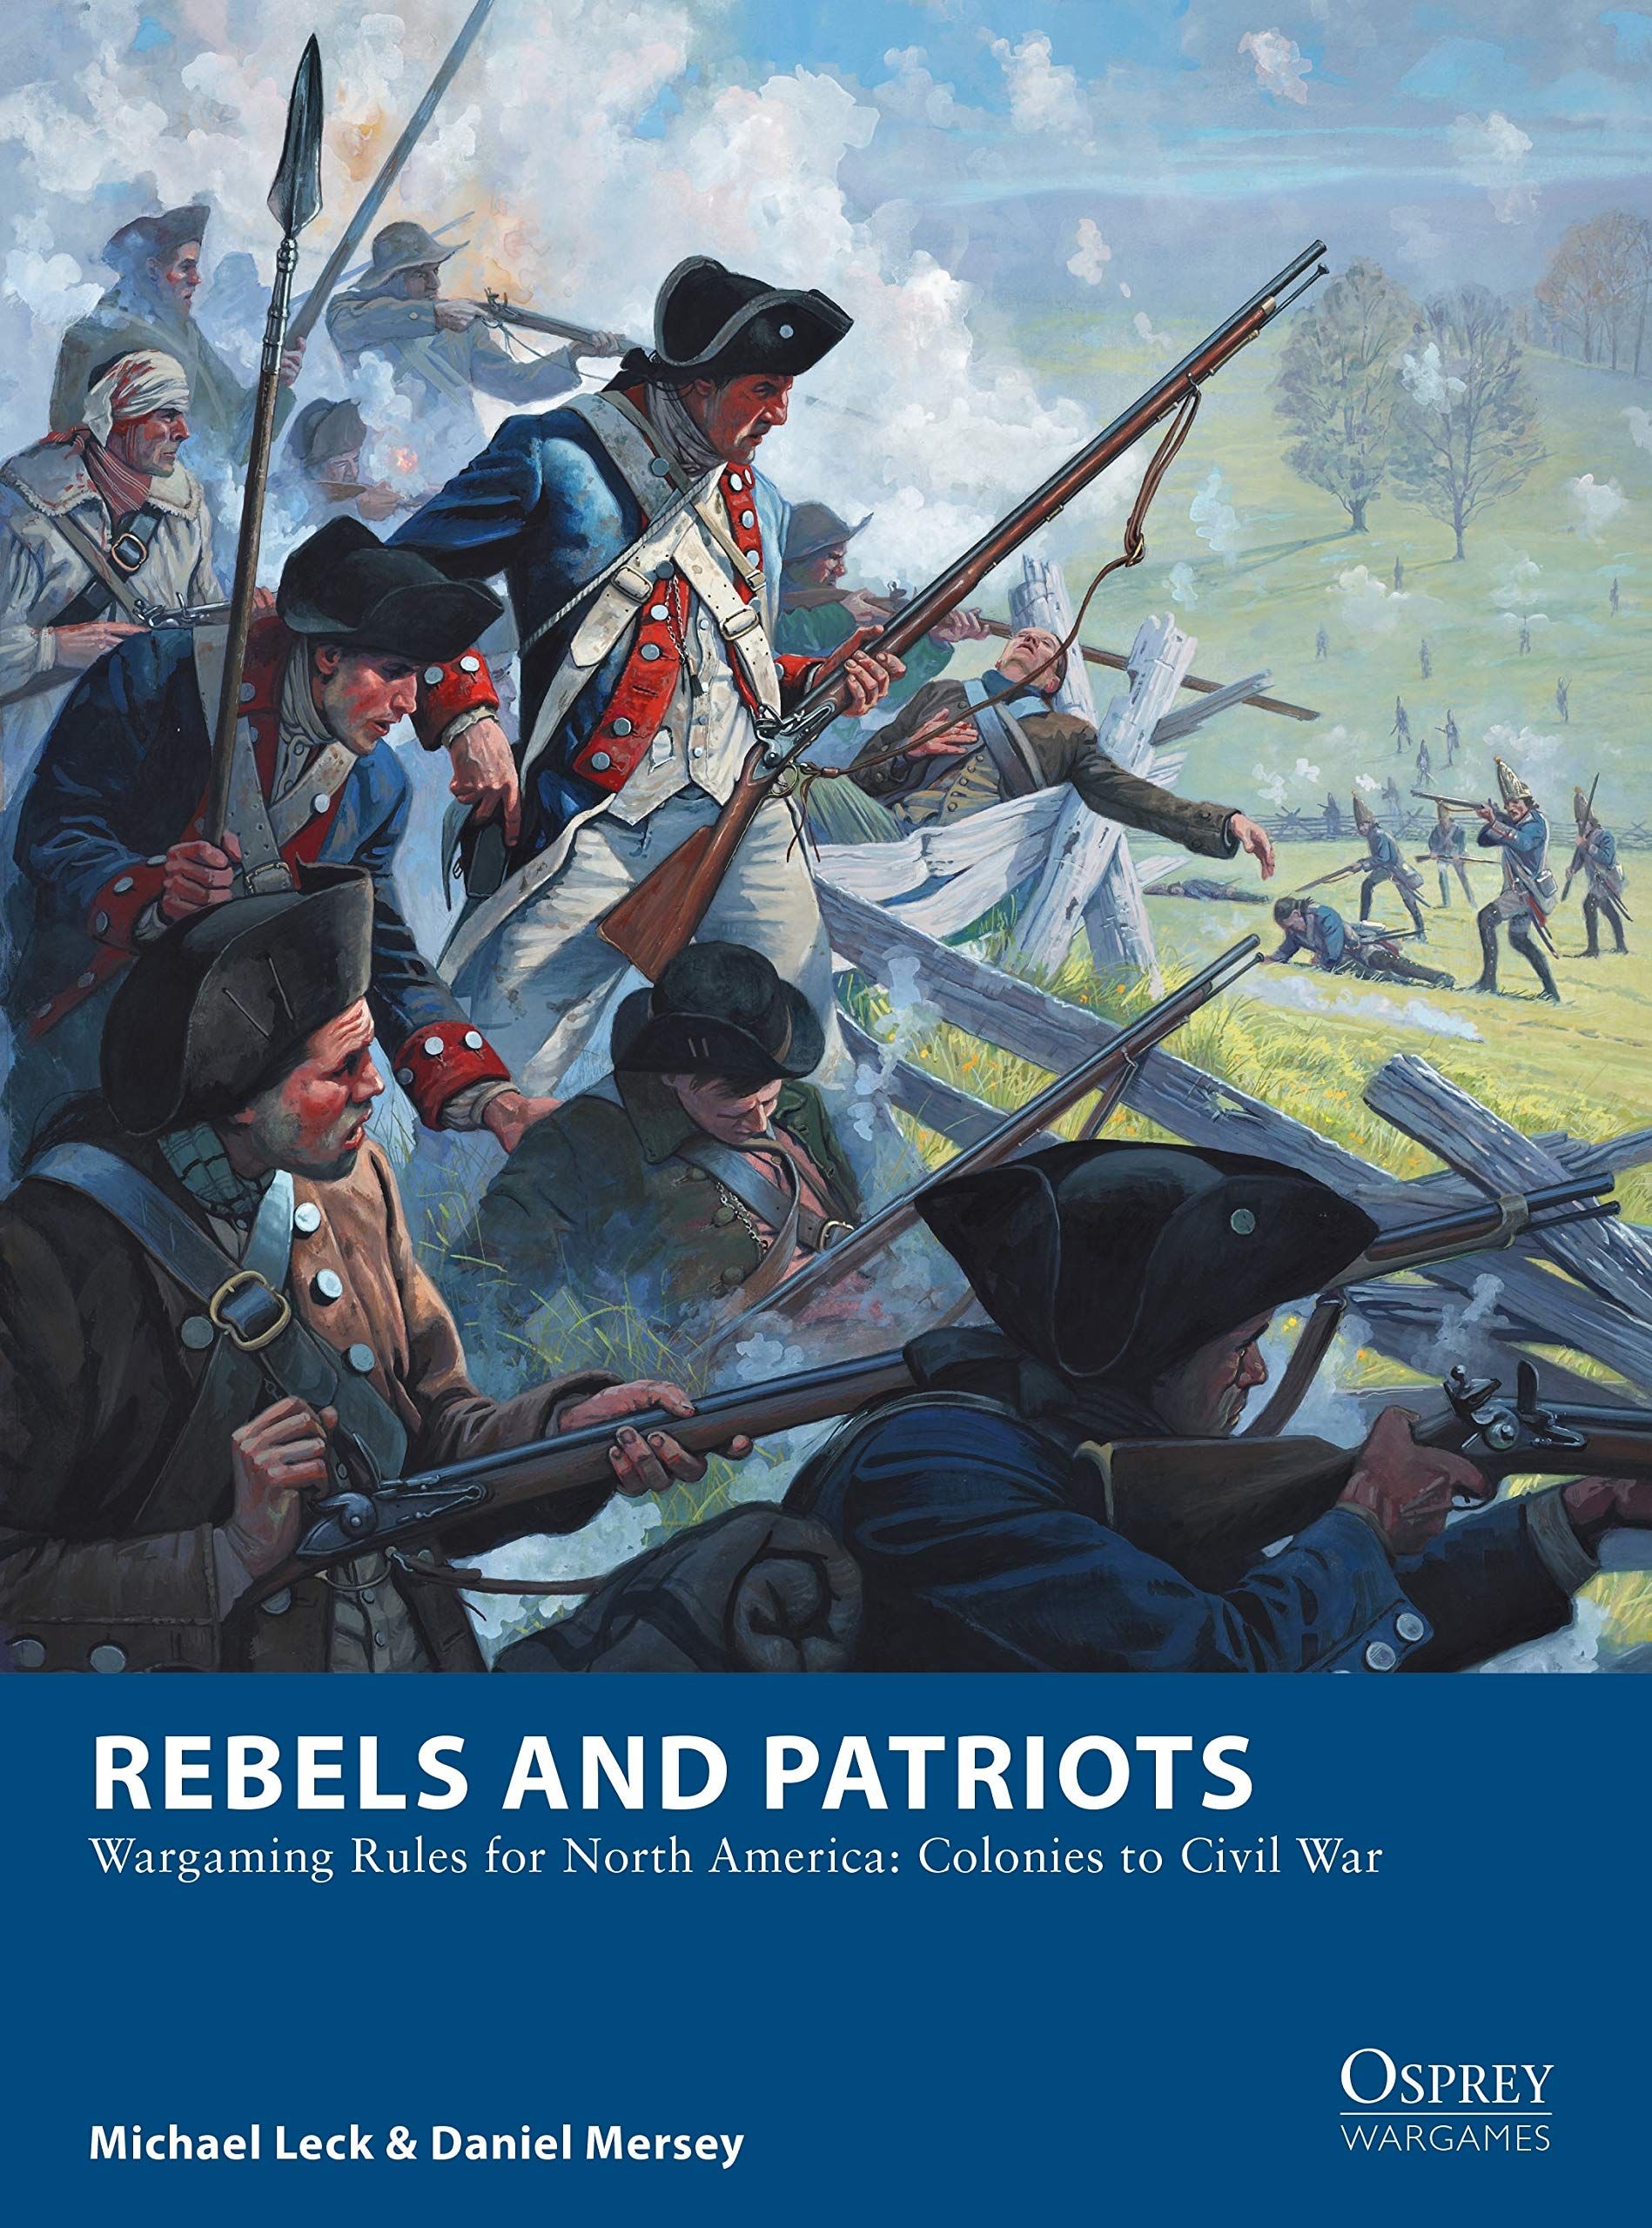 Rebels and Patriots: Wargaming Rules for North America